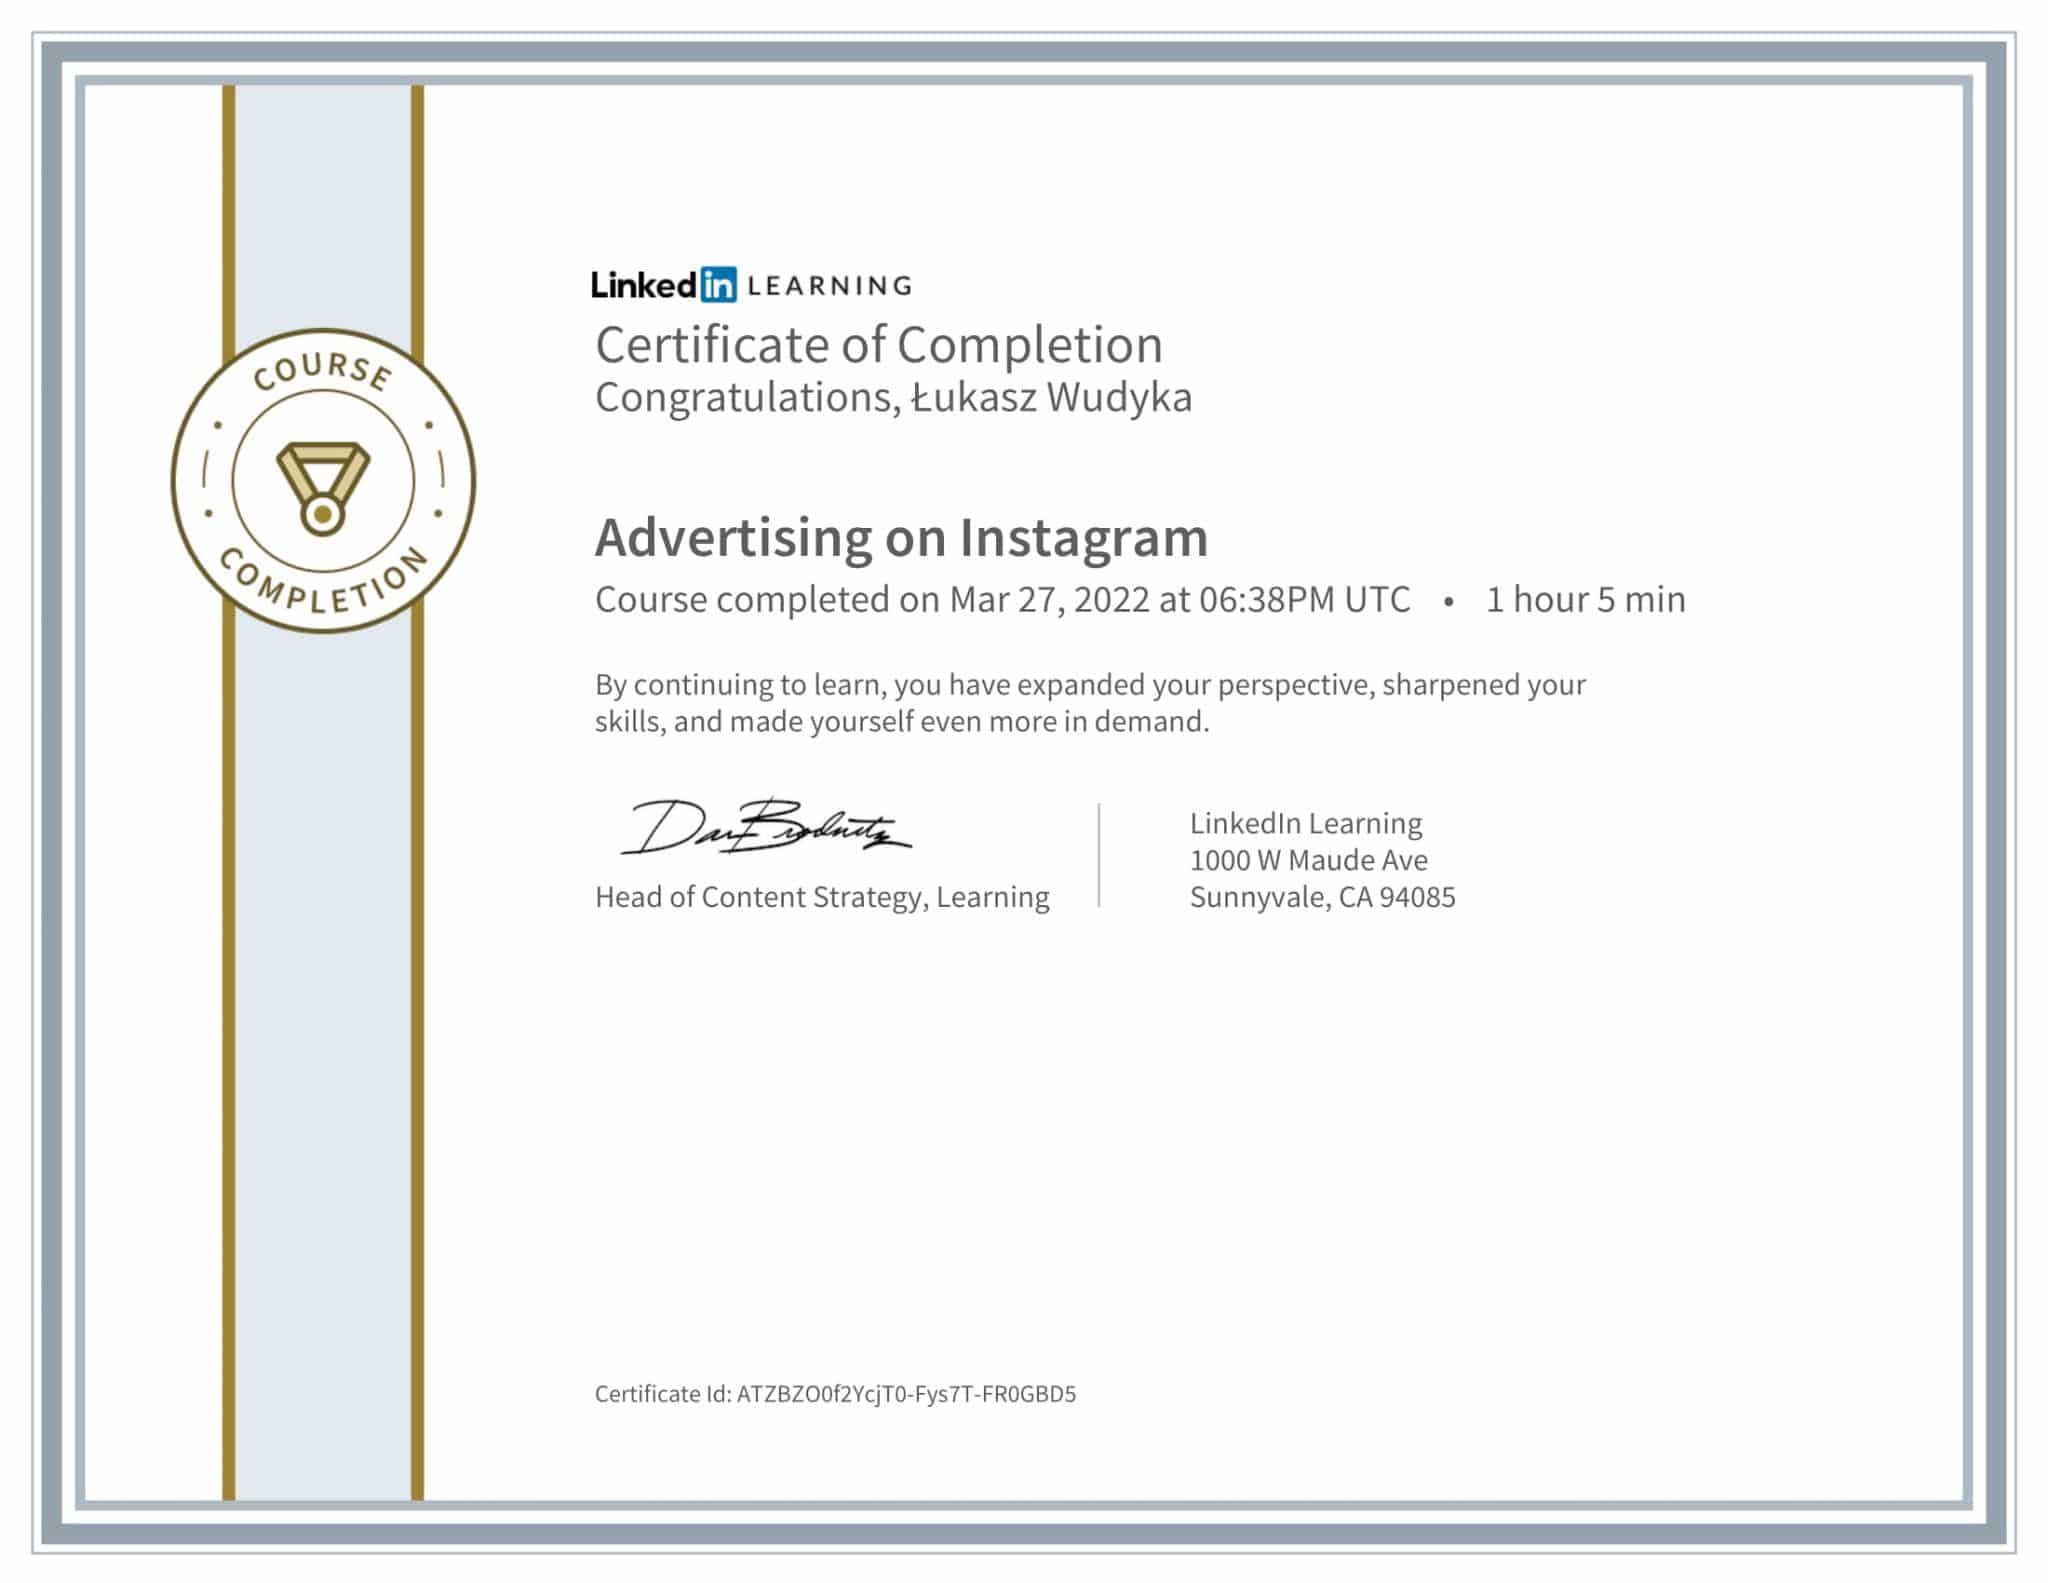 CertificateOfCompletion_Advertising on Instagram-1